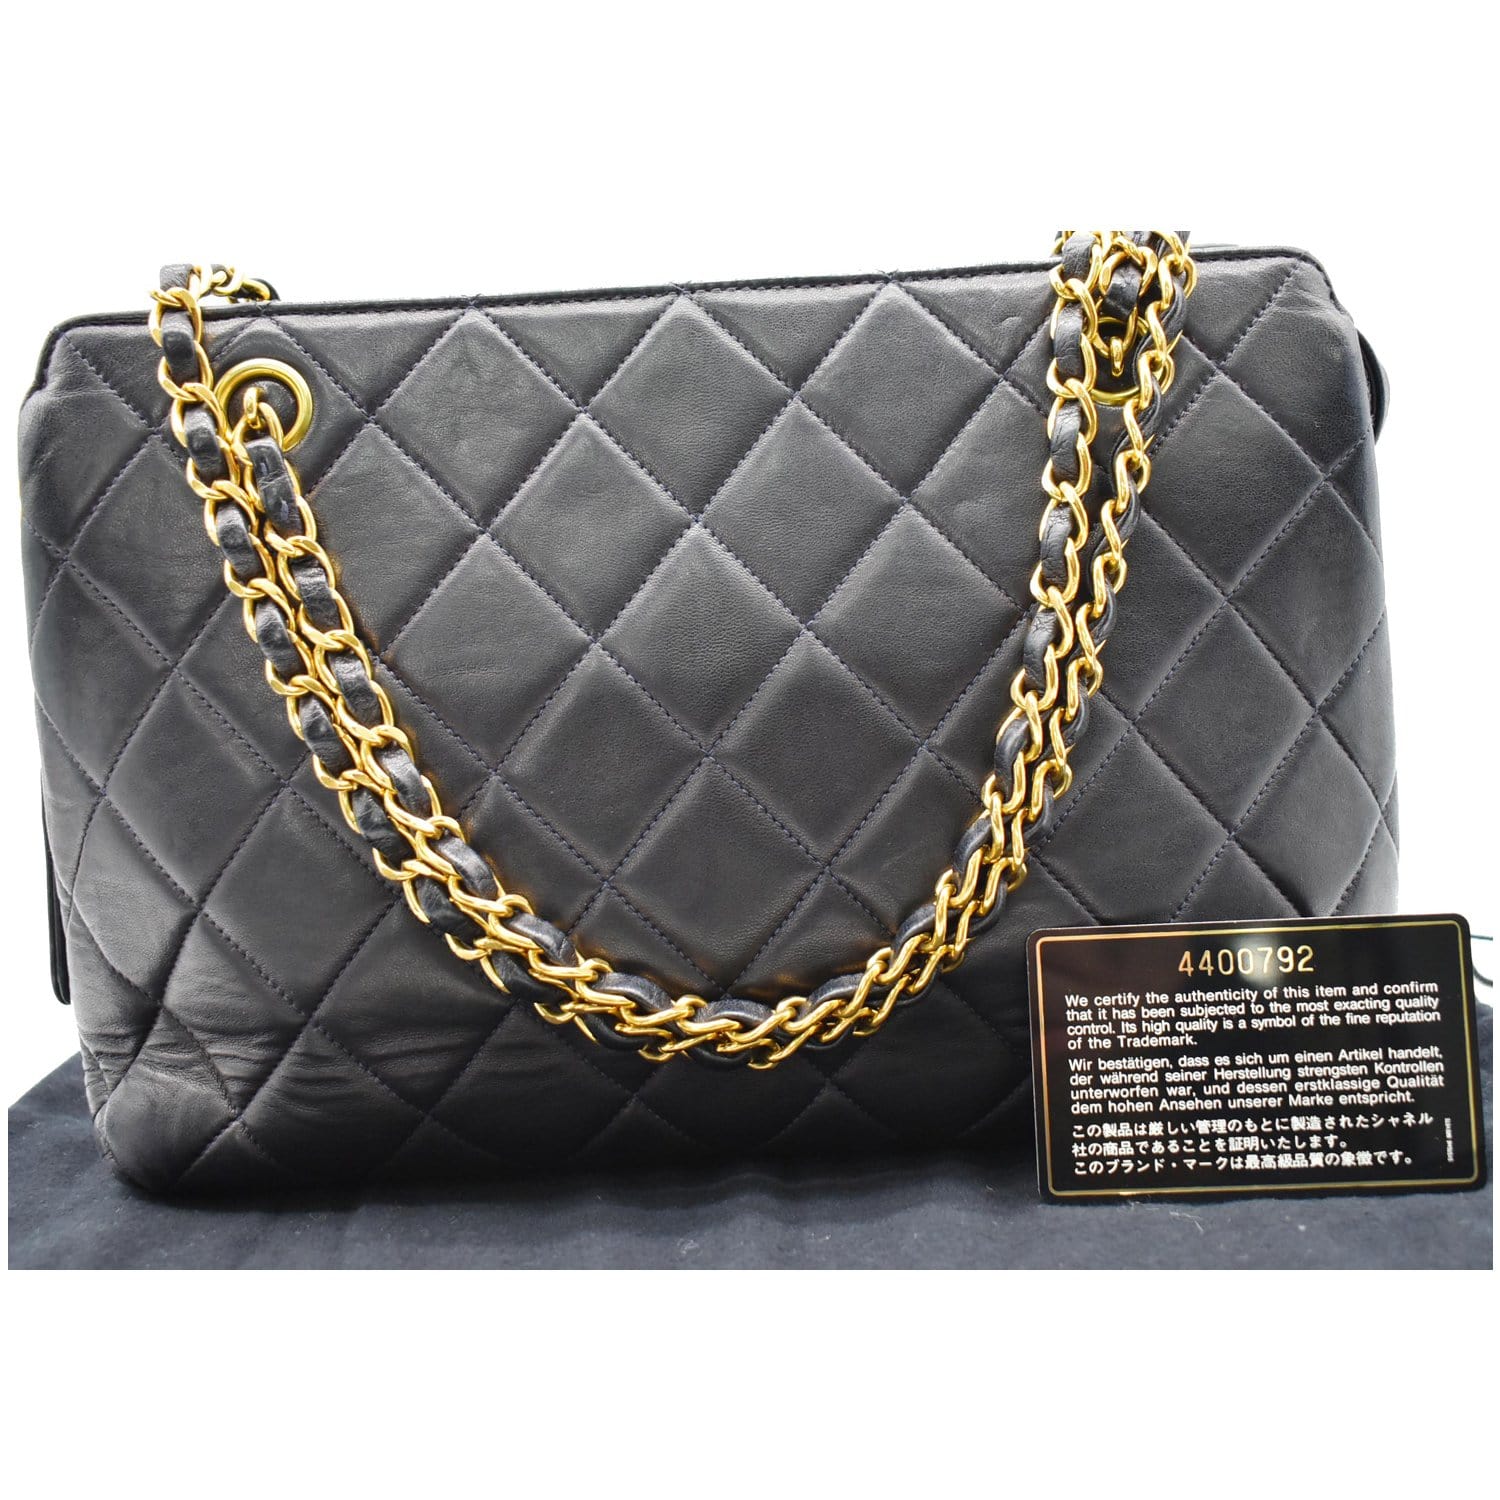 CHANEL Leather Bags & Handbags for Women, Authenticity Guaranteed